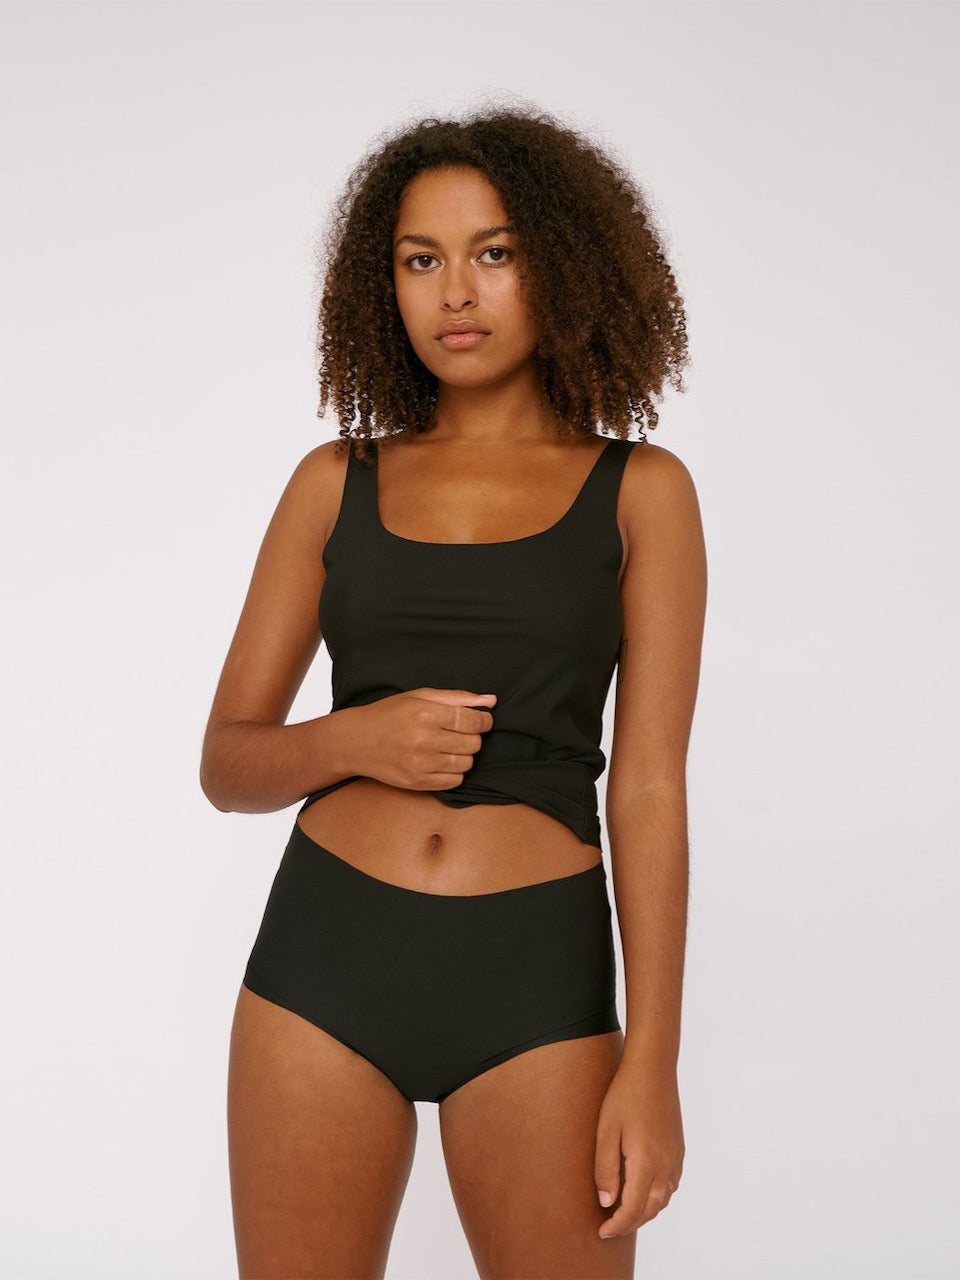 A woman wearing Organic Basics' Invisible Cheeky High-Rise Briefs (2-pack) in black.